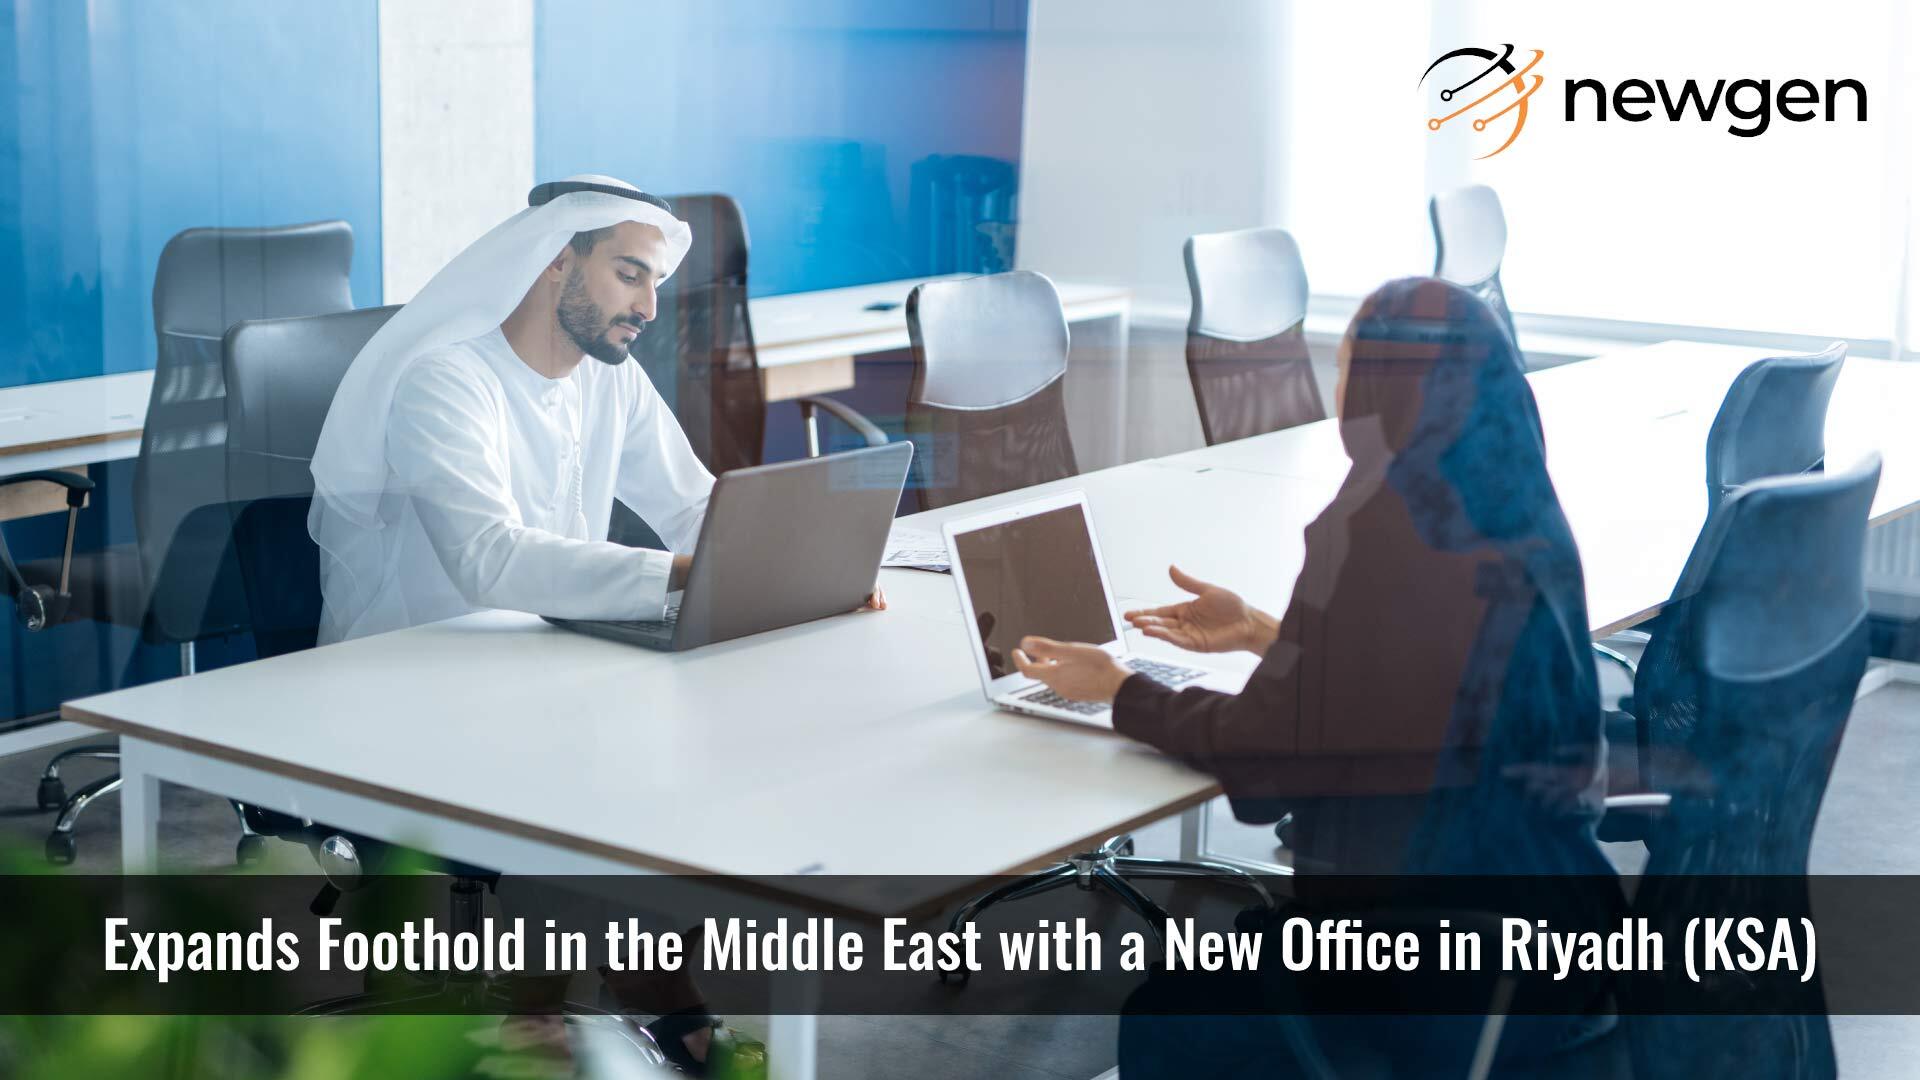 Newgen Software Expands Foothold in the Middle East with a New Office in Riyadh (KSA)